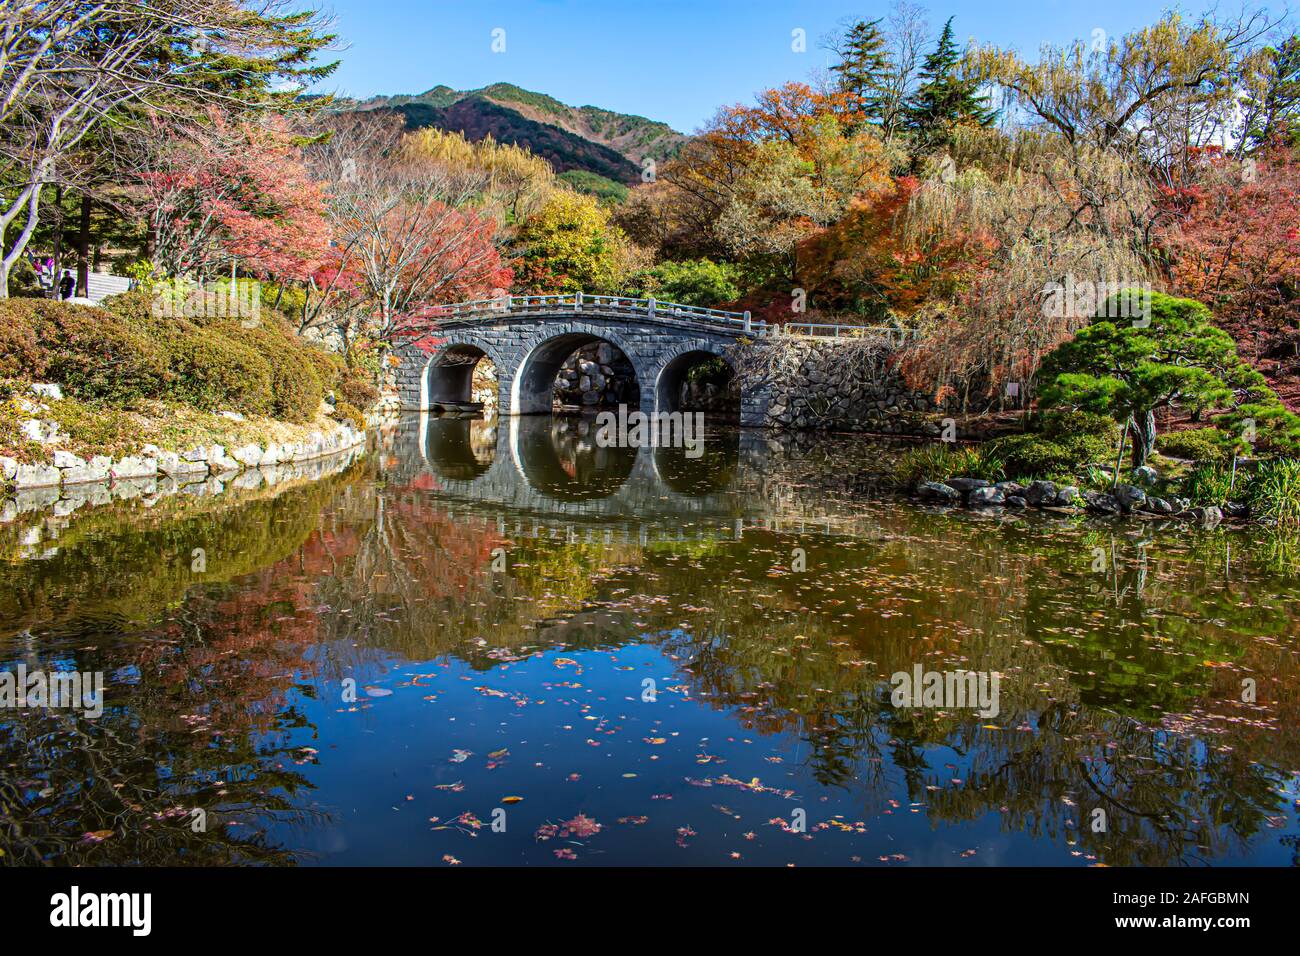 Ancient bridge in South Korean Mountains with a beautiful autumn display of colour reflecting in the lake. Stock Photo